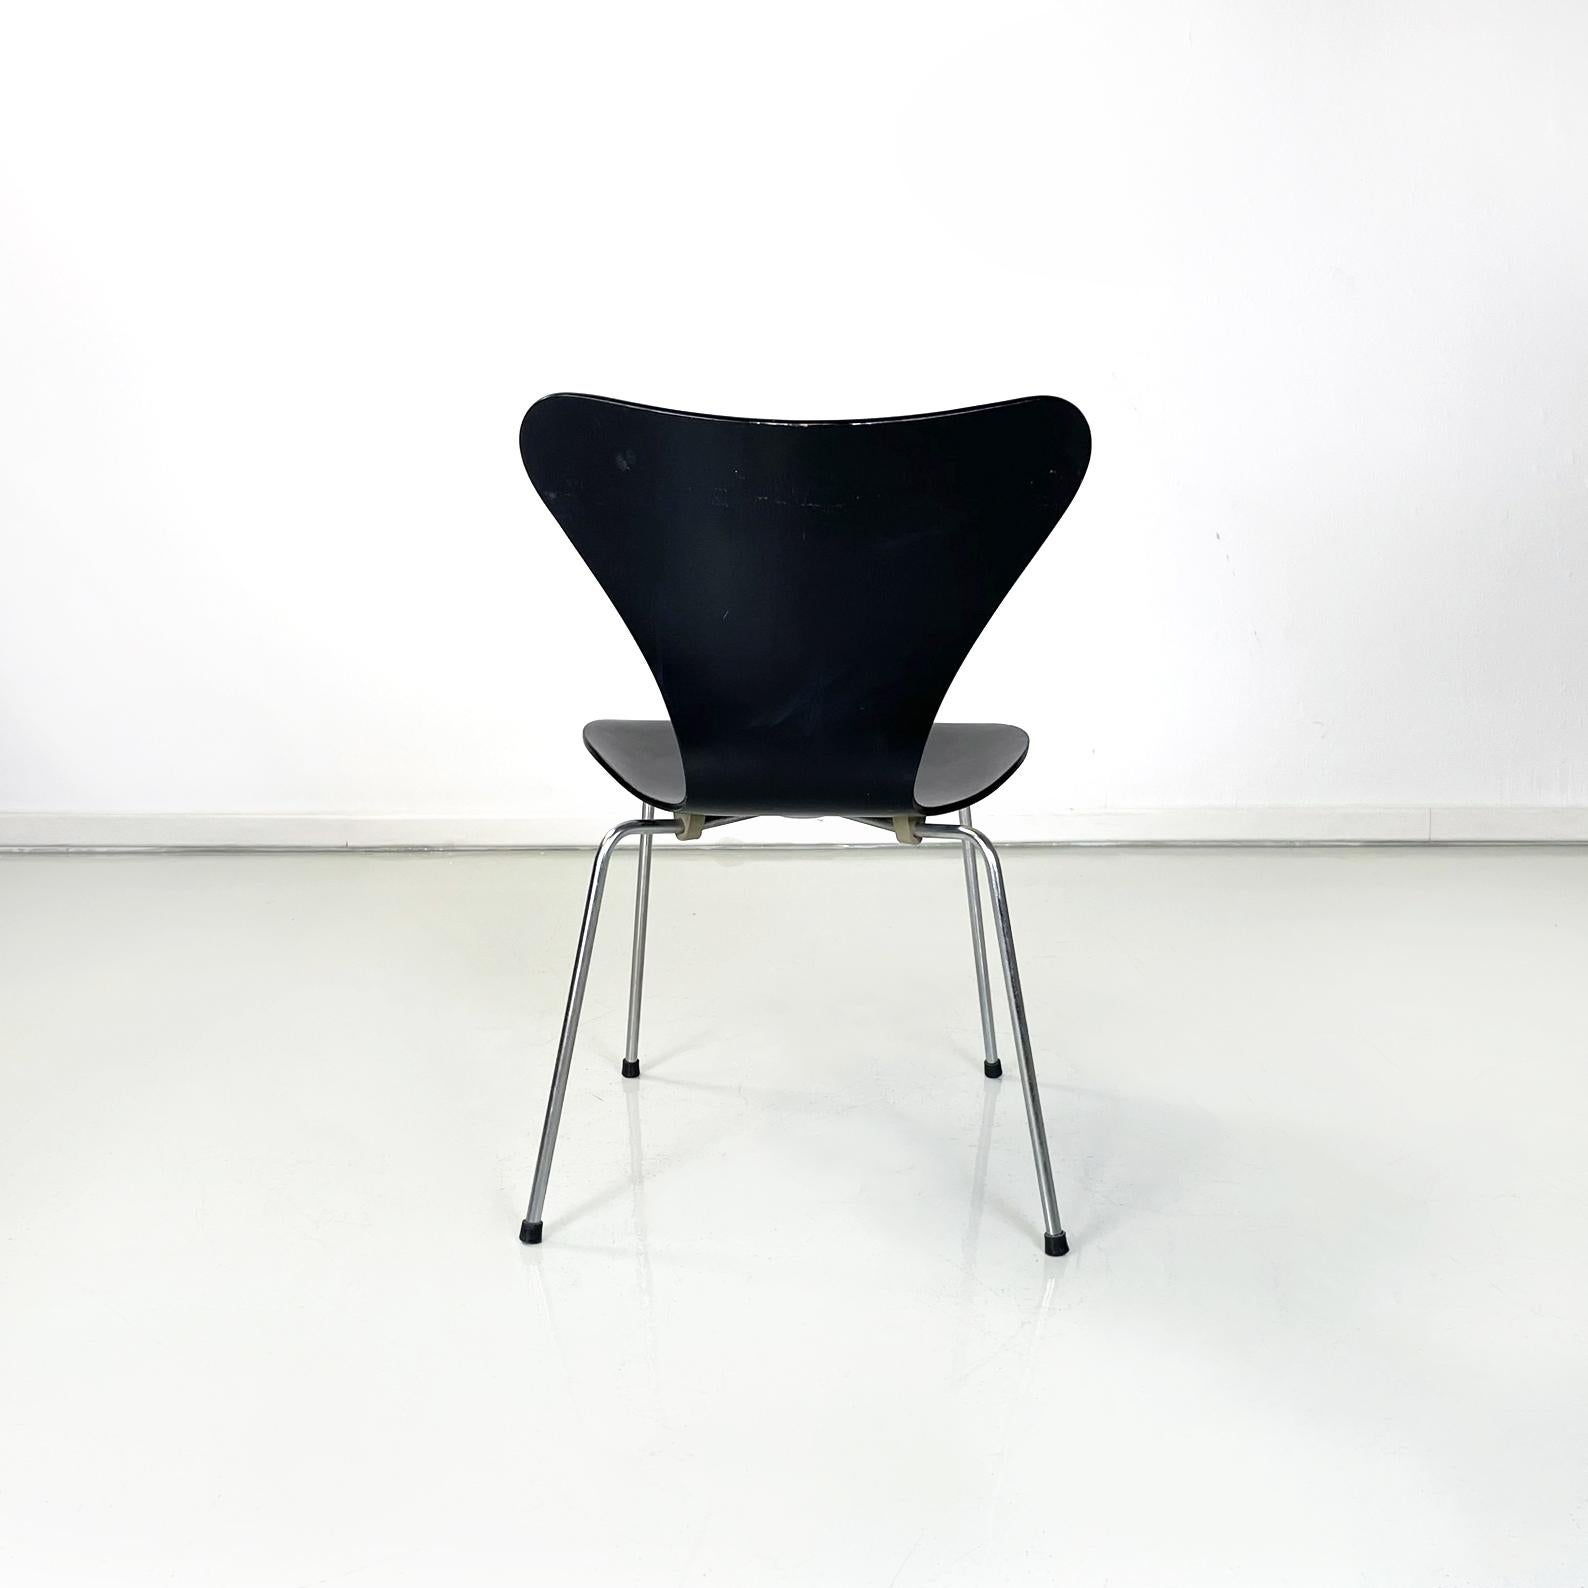 Metal Danish modern Black wood Chairs 7 Series by Jacobsen for Fritz Hansen, 1970s For Sale